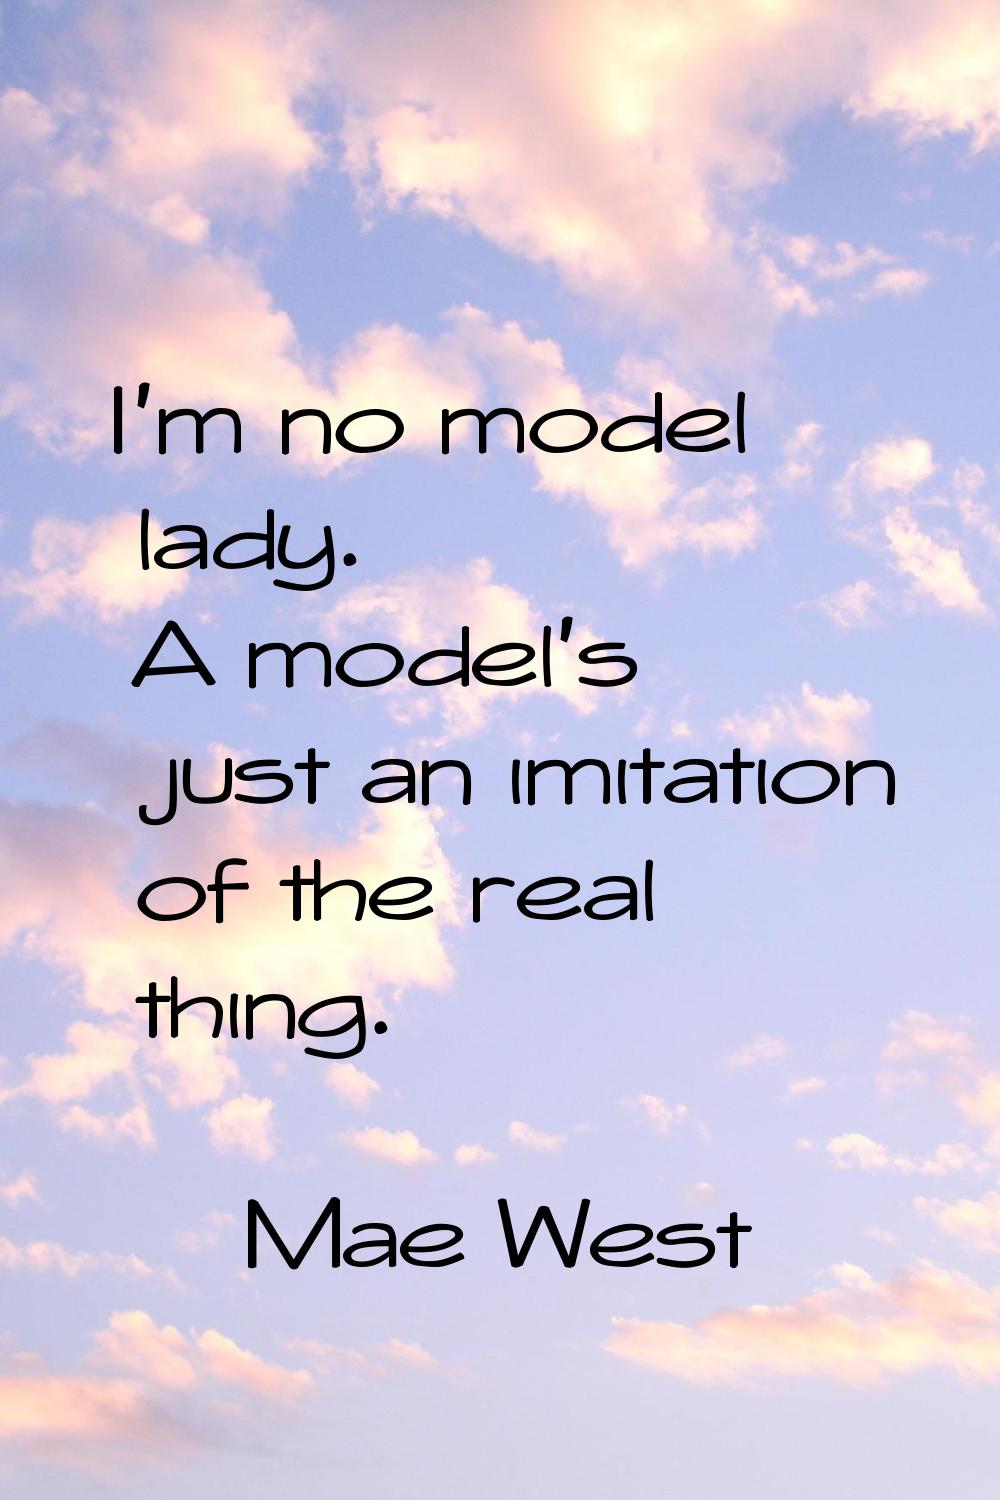 I'm no model lady. A model's just an imitation of the real thing.